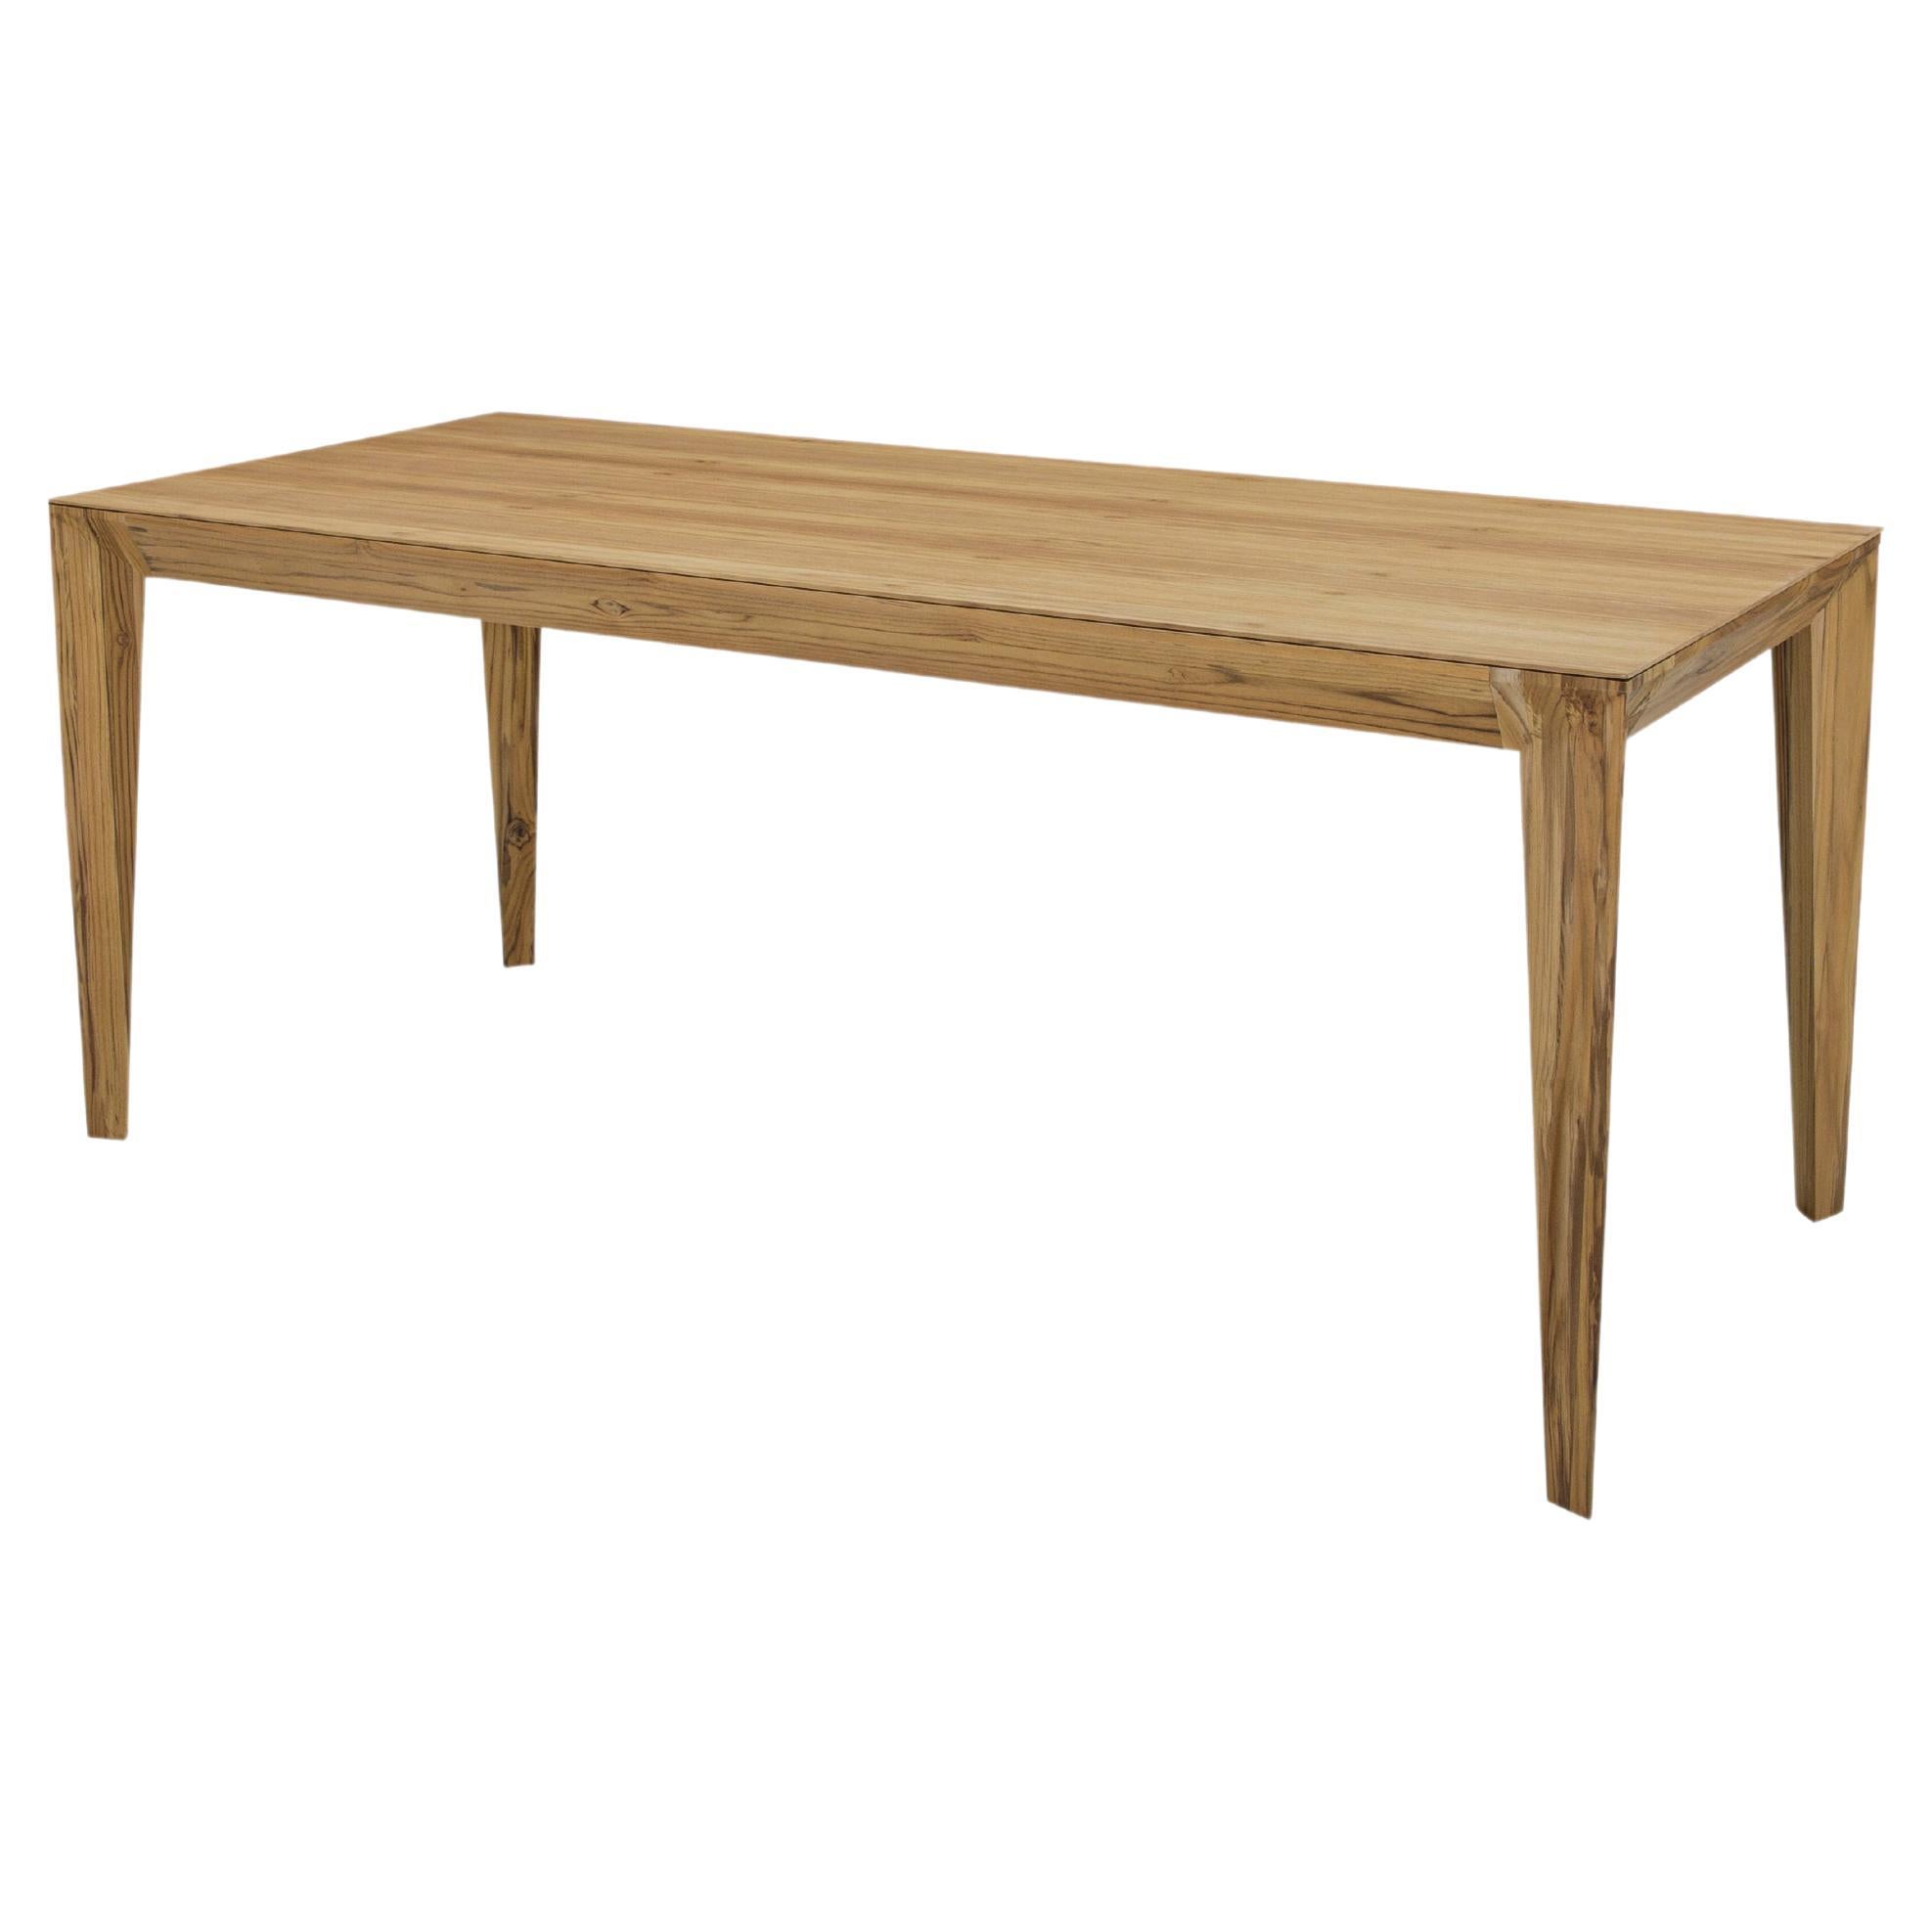 Luce Rectangular Dining Table with a Teak Wood Finish Veneered Table Top 95''